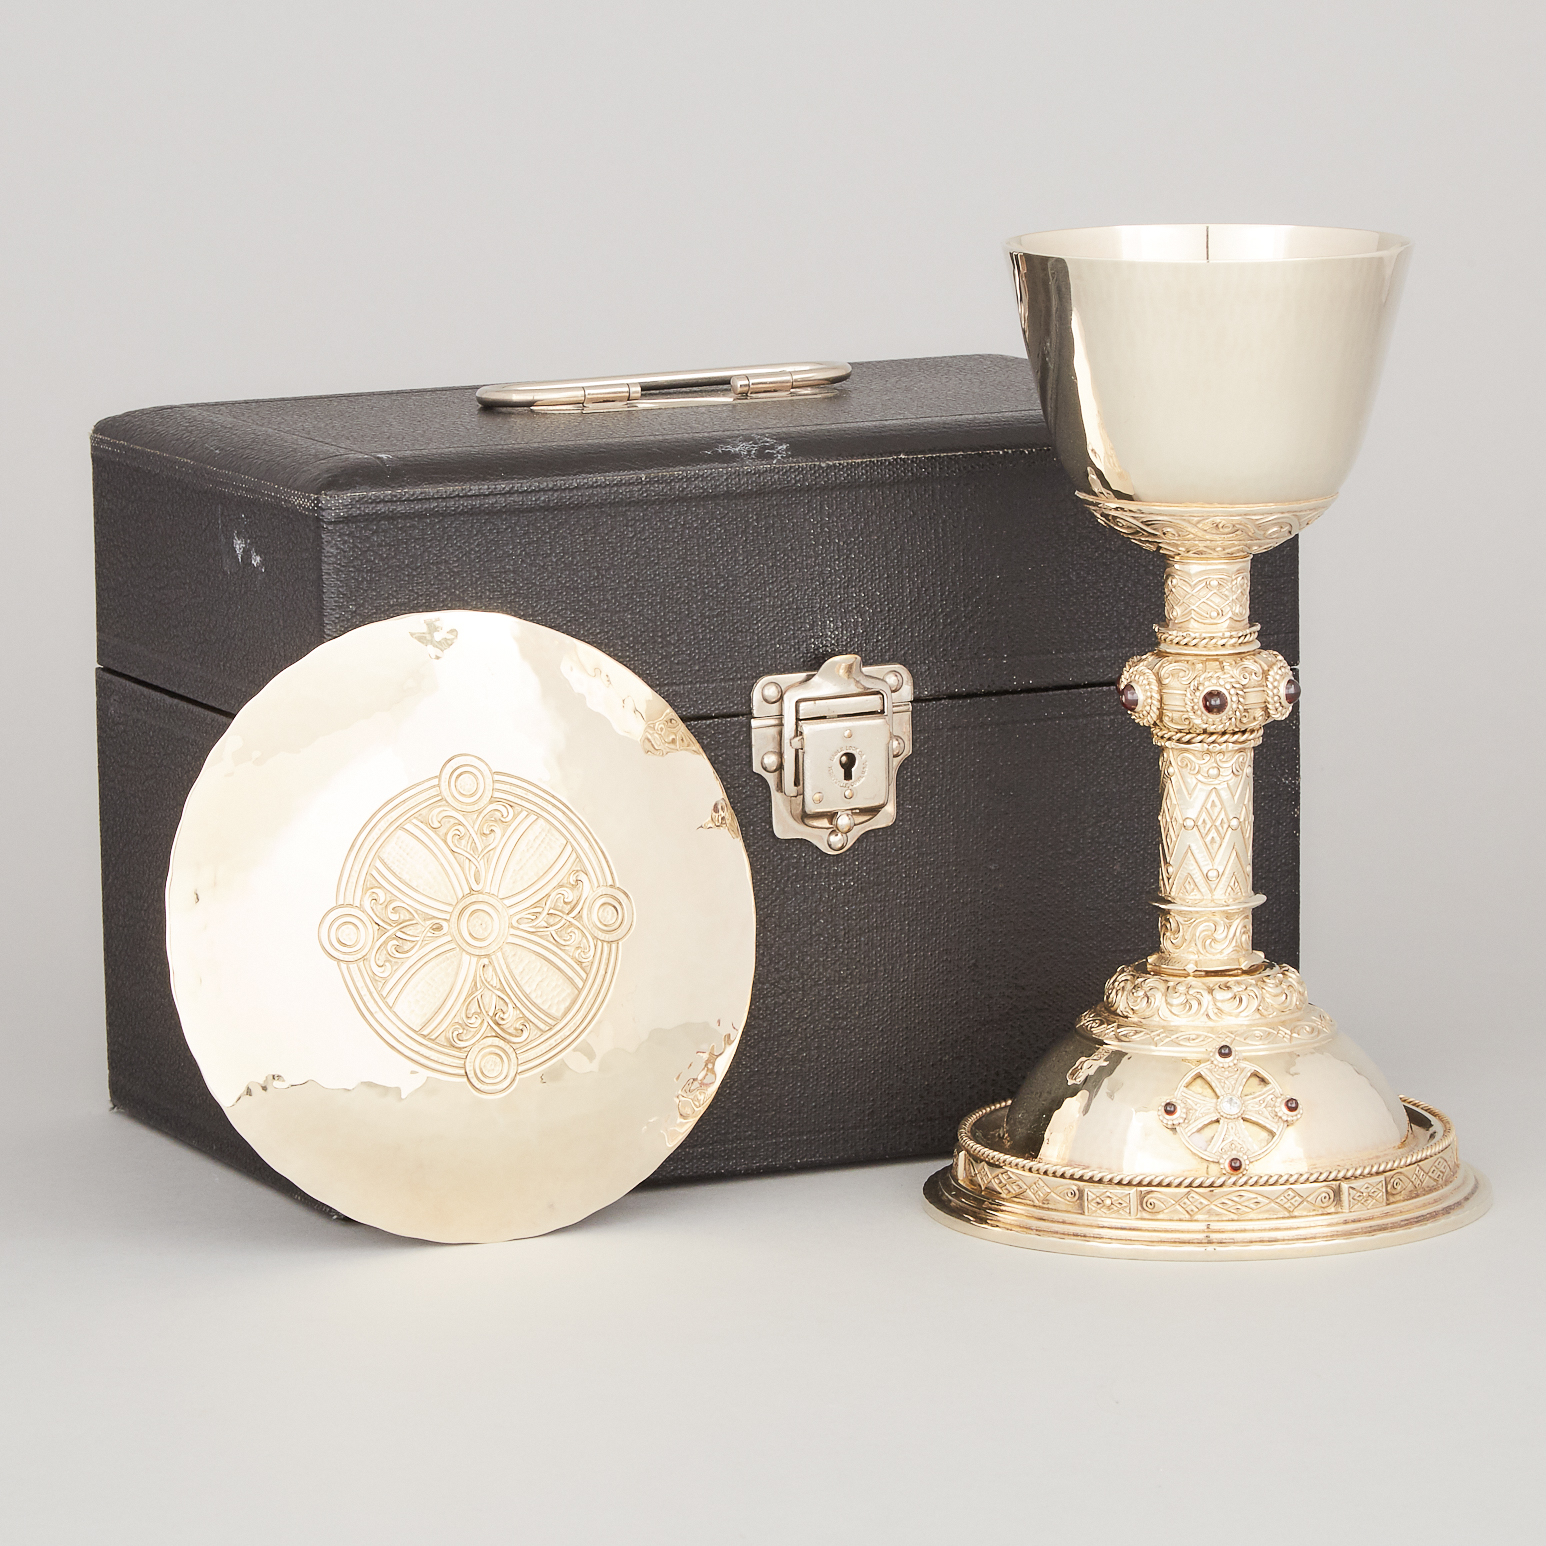 North American Gem-Set Silver-Gilt Chalice and Paten, probably Canadian, c.1950